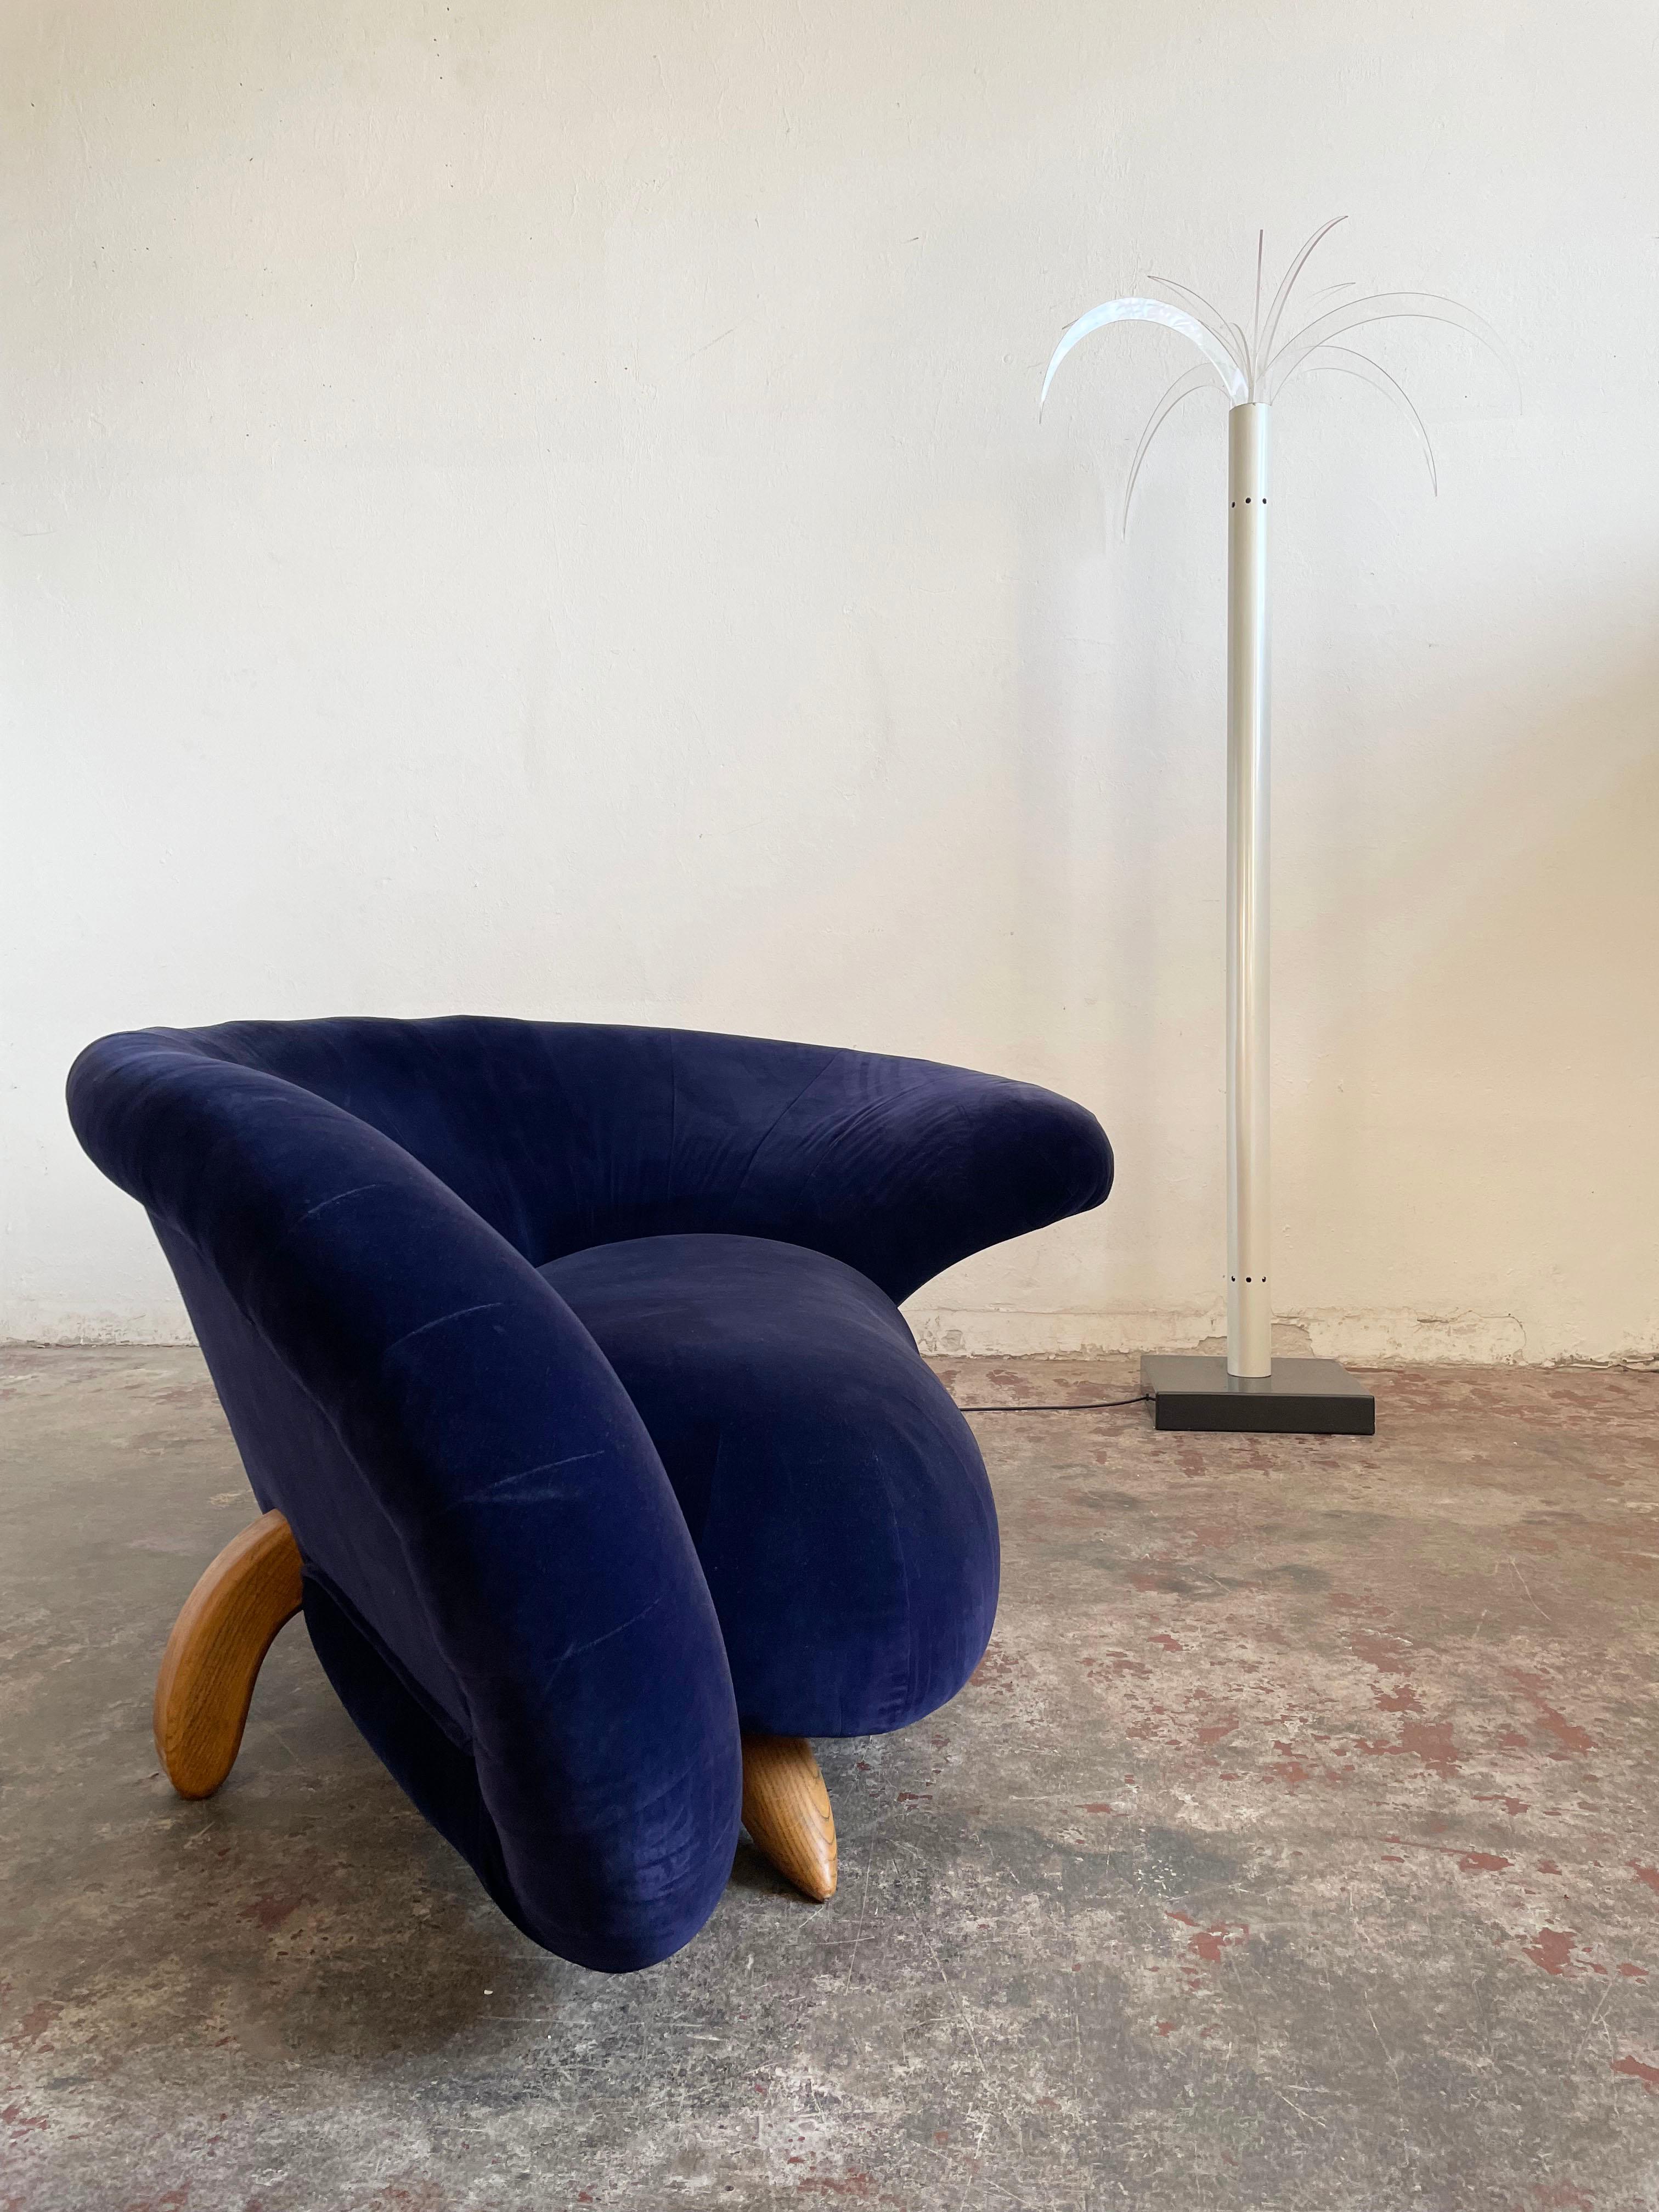 Vintage sculptural postmodern loveseat from the 1980s/1990s upholstered in blue velvet-like fabric.

It has an asymmetrical rounded curved form, original upholstery in beautiful deep blue color, and wooden legs.

Size: 76 x 204 x 122 cm (H/W/D),